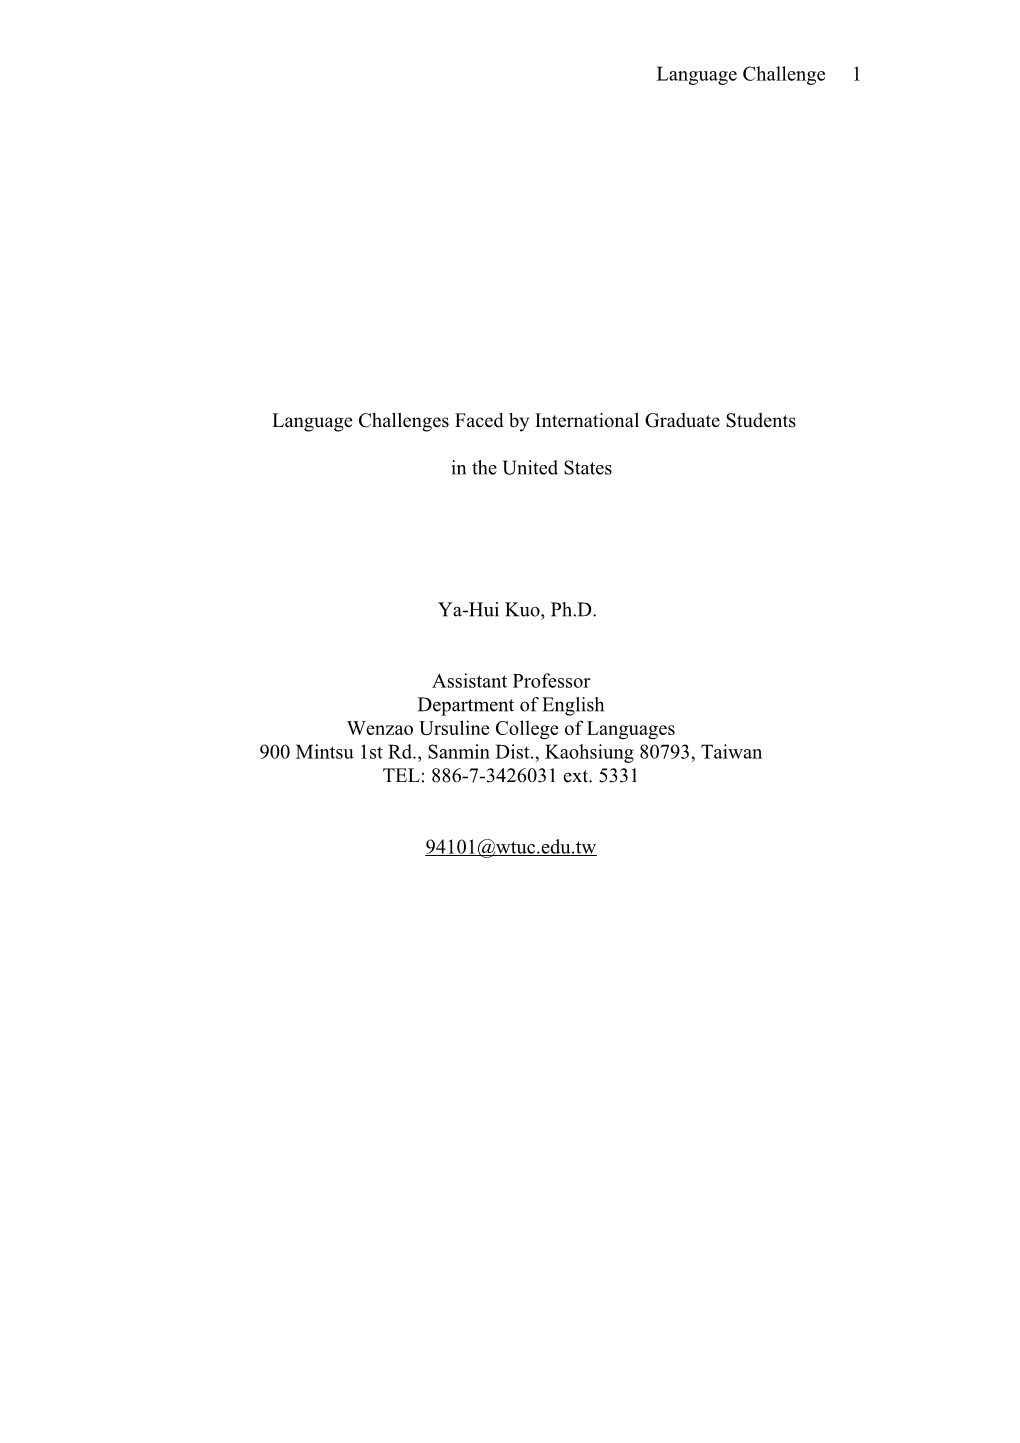 Language Challenges Faced by International Students in the United States